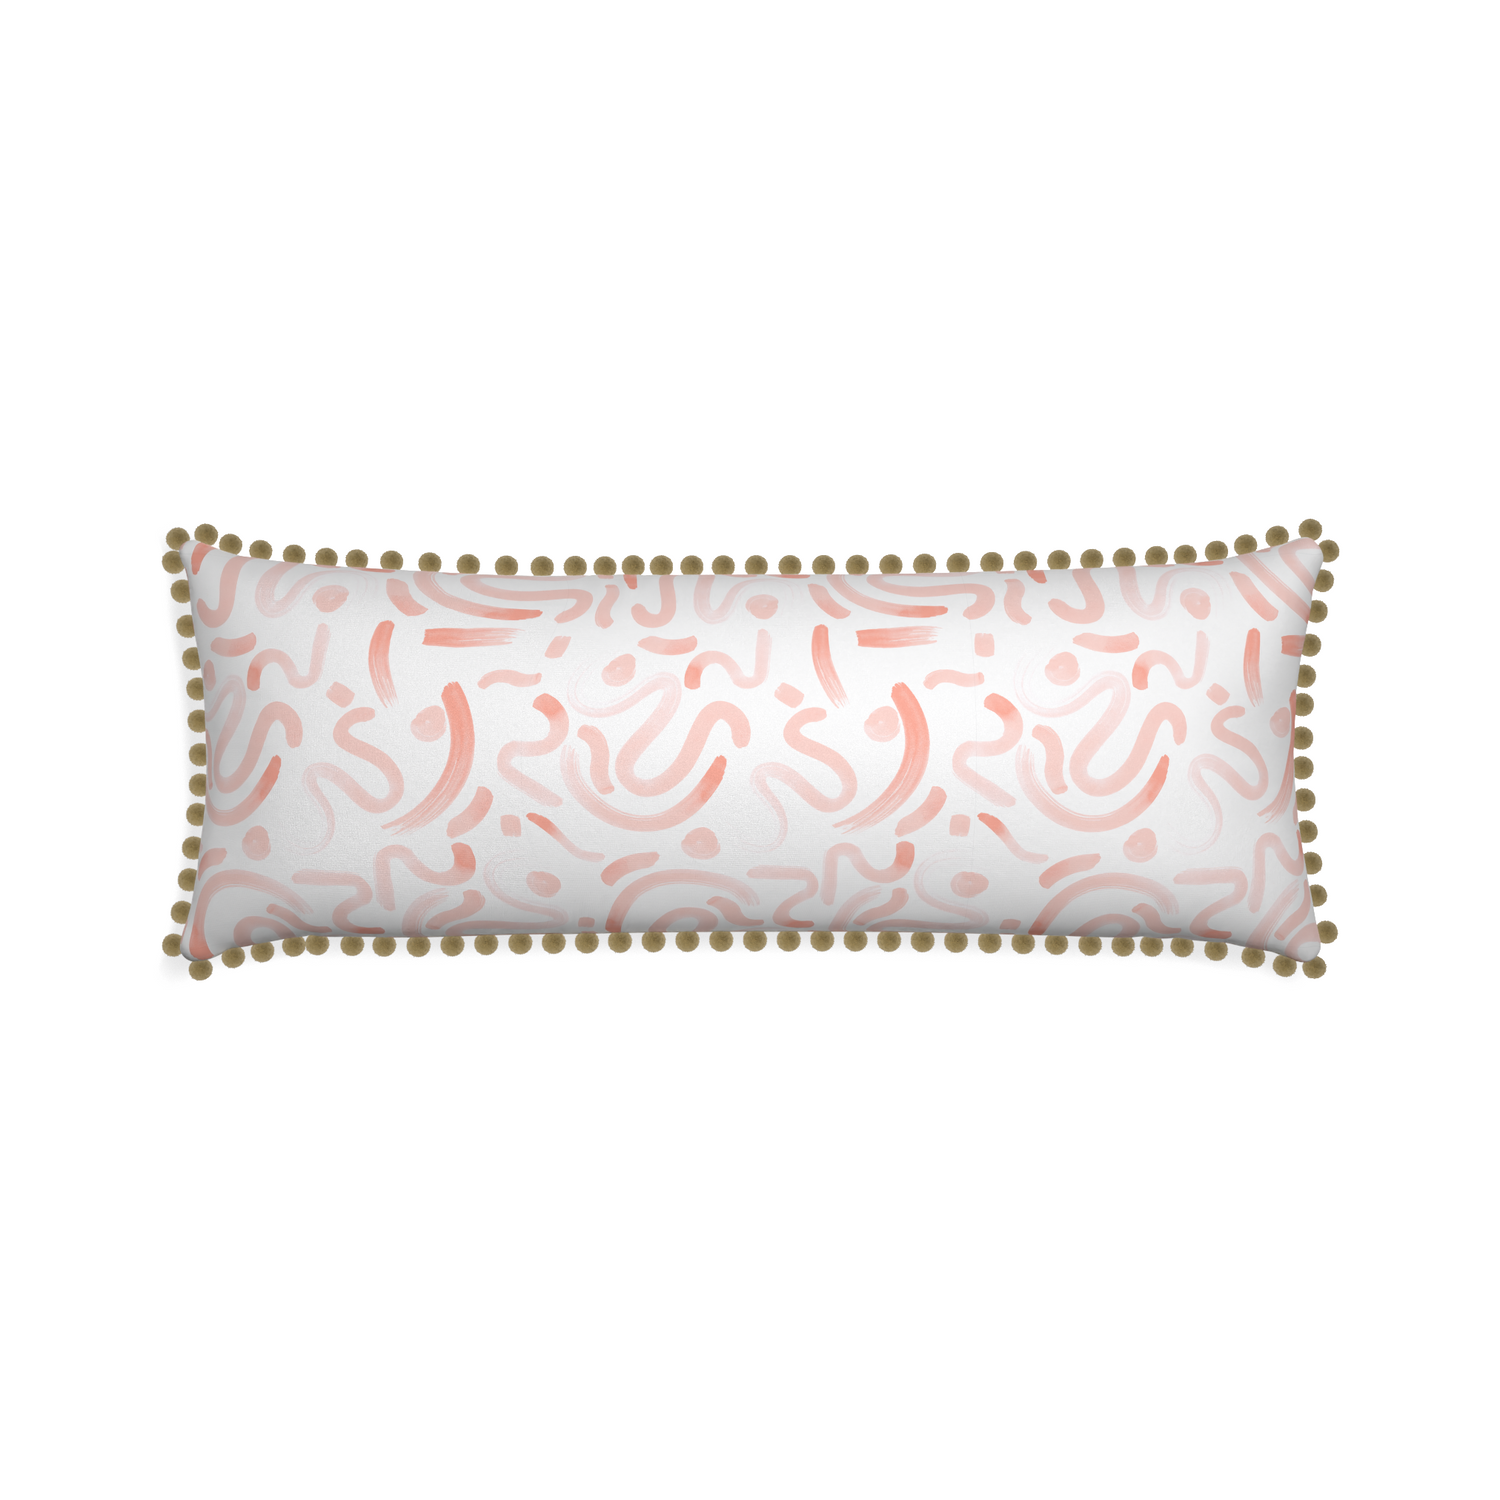 Xl-lumbar hockney pink custom pink graphicpillow with olive pom pom on white background